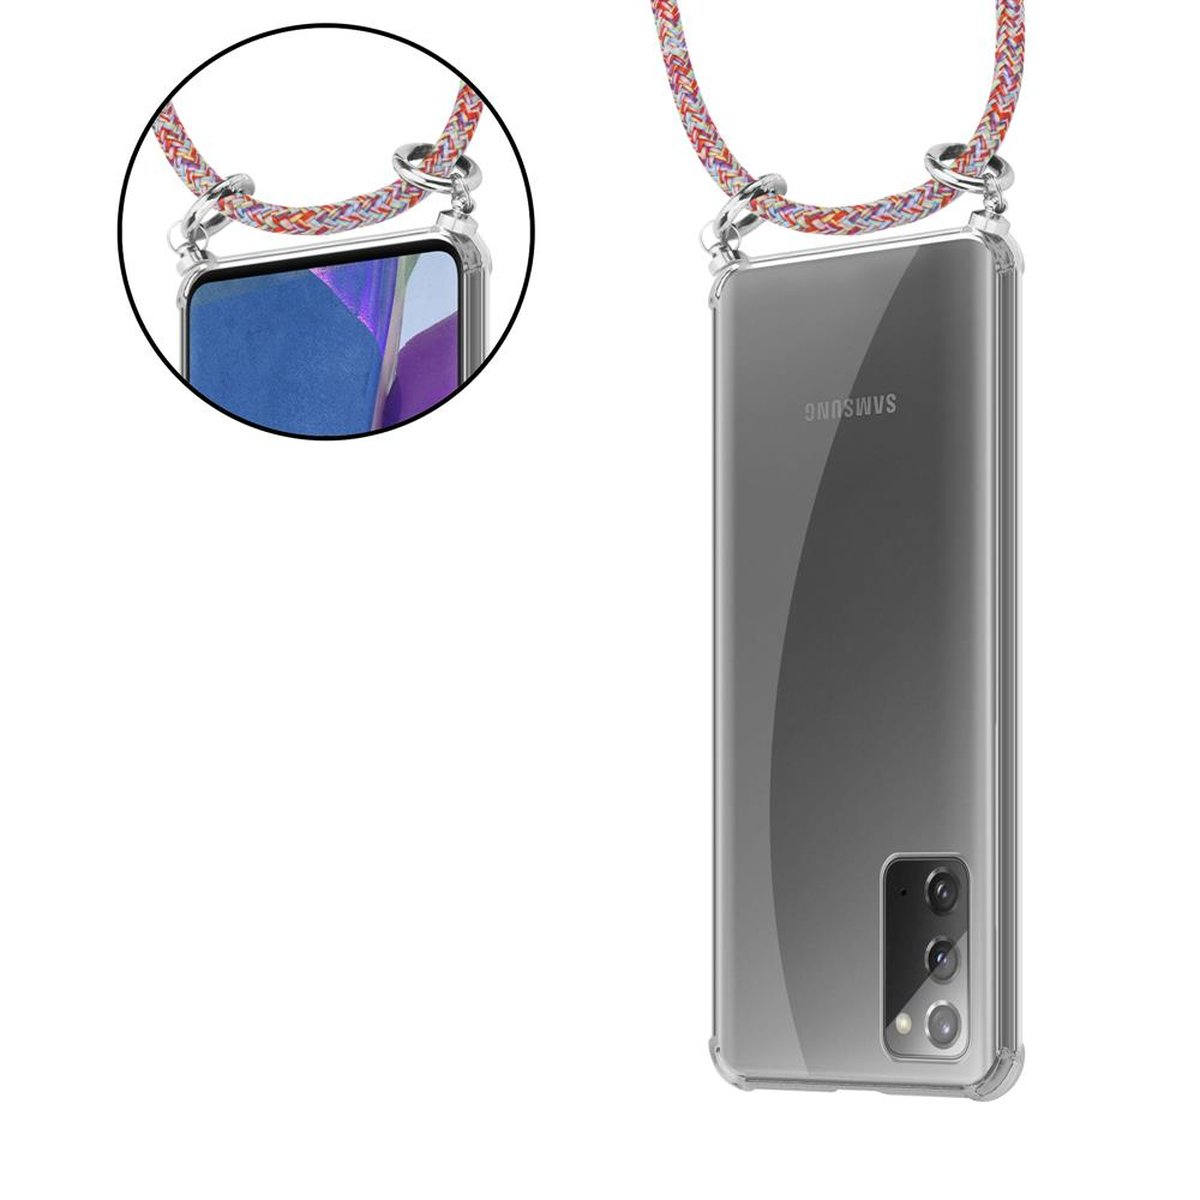 CADORABO Handy Kette mit Silber Galaxy Band COLORFUL Backcover, Samsung, 20, Hülle, NOTE Kordel Ringen, und abnehmbarer PARROT